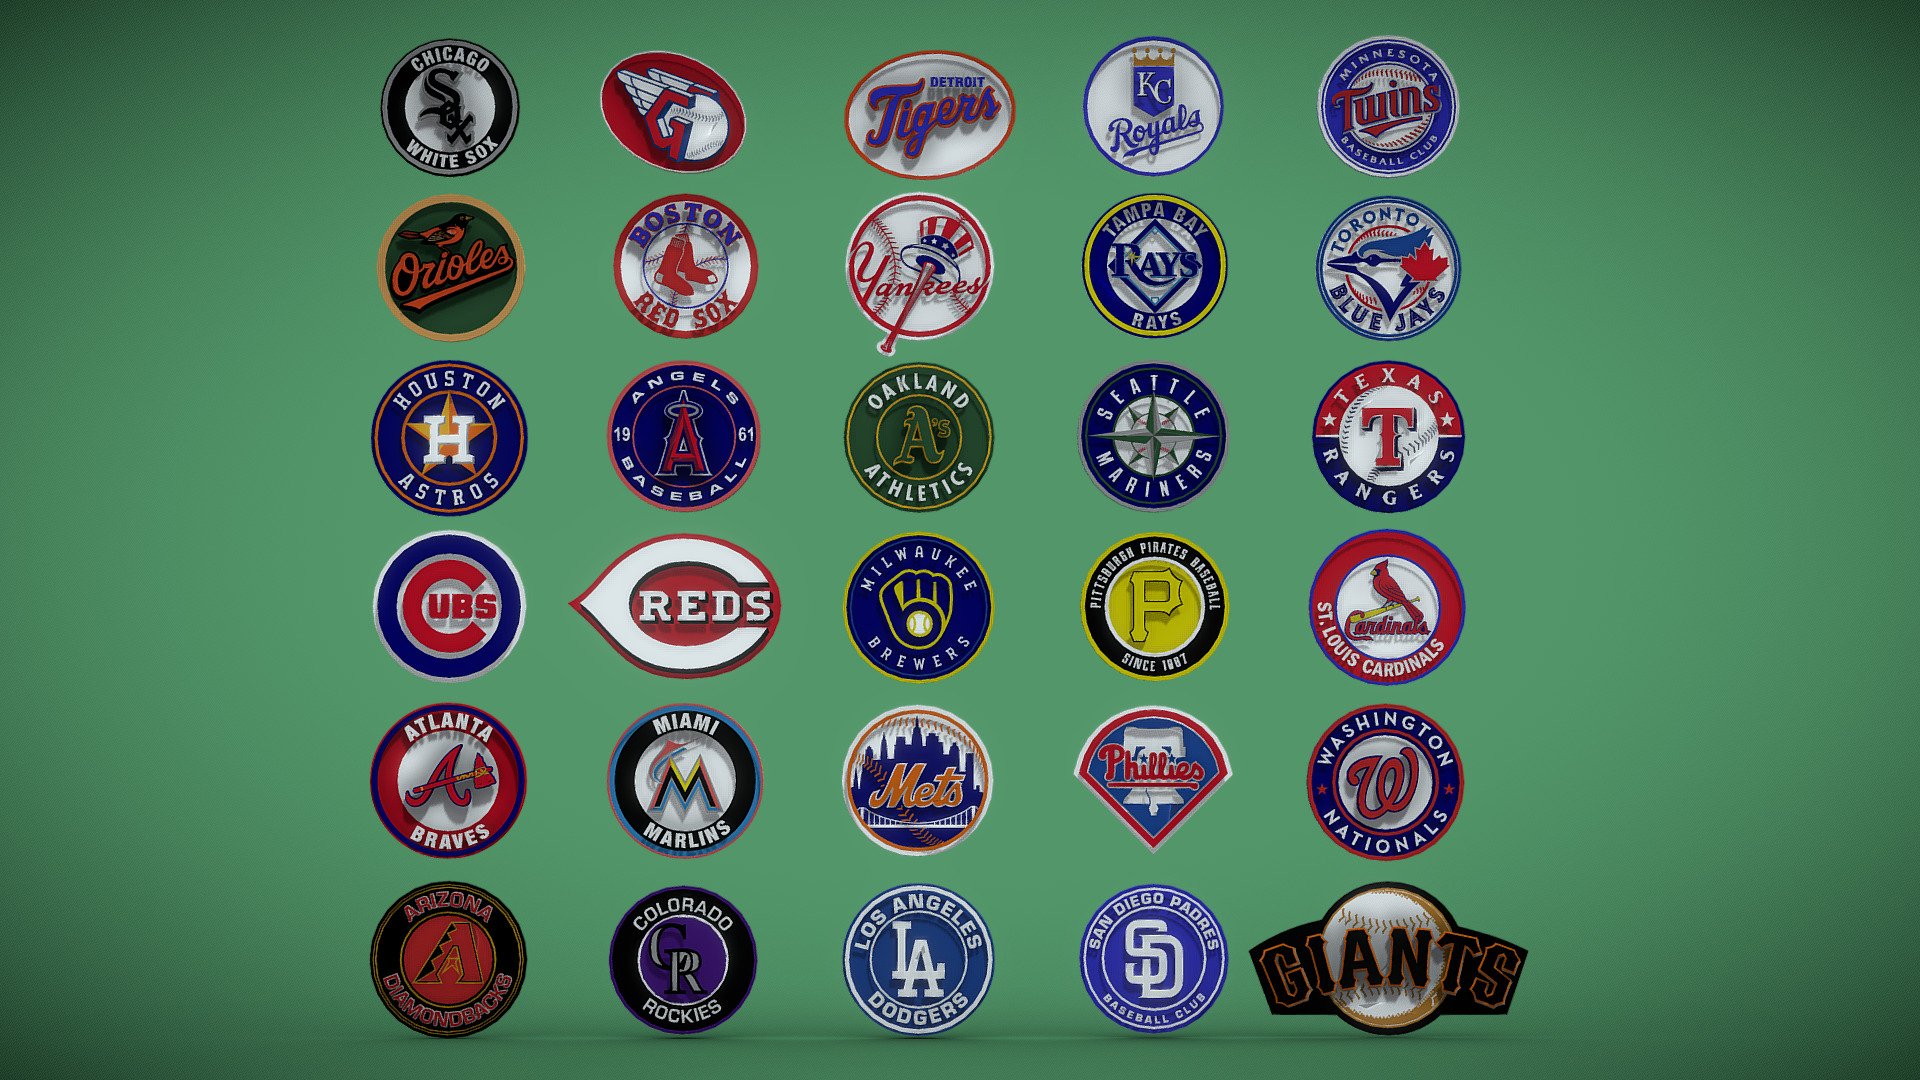 Major League Baseball
EVERY TEAM'S LOGO Printable and renderable versions

Ready to print
Ready to render
Videogame Real Time ready
10cms tall each one approx
Merged and color-splitted models
Format: FBX vertex color and STL full and splitted versions
Ilustrator vector included

Teams:

Arizona Diamondbacks
Atlanta Braves
Baltimore Orioles
Boston Red Sox
Chicago Cubs
Chicago White Sox
Cincinnati Reds
Cleveland Guardians
Colorado Rockies
Detroit Tigers
Houston Astros
Kansas City Royals
Los Angeles Angels
Los Angeles Dodgers
Miami Marlins
Milwaukee Brewers
Minnesota Twins
New York Mets
New York Yankees
Oakland Athletics
Philadelphia Phillies
Pittsburgh Pirates
San Diego Padres
Giants
Mariners
Cardinals
Tampa Bay Rays
Texas Rangers
Toronto Blue Jays
Washington Nationals

If you have any questions do not hesitate to write me, I will be happy to answer! - MLB Major League Baseball EVERY TEAM'S LOGOS - Buy Royalty Free 3D model by generalista3D (@adelin) 3d model